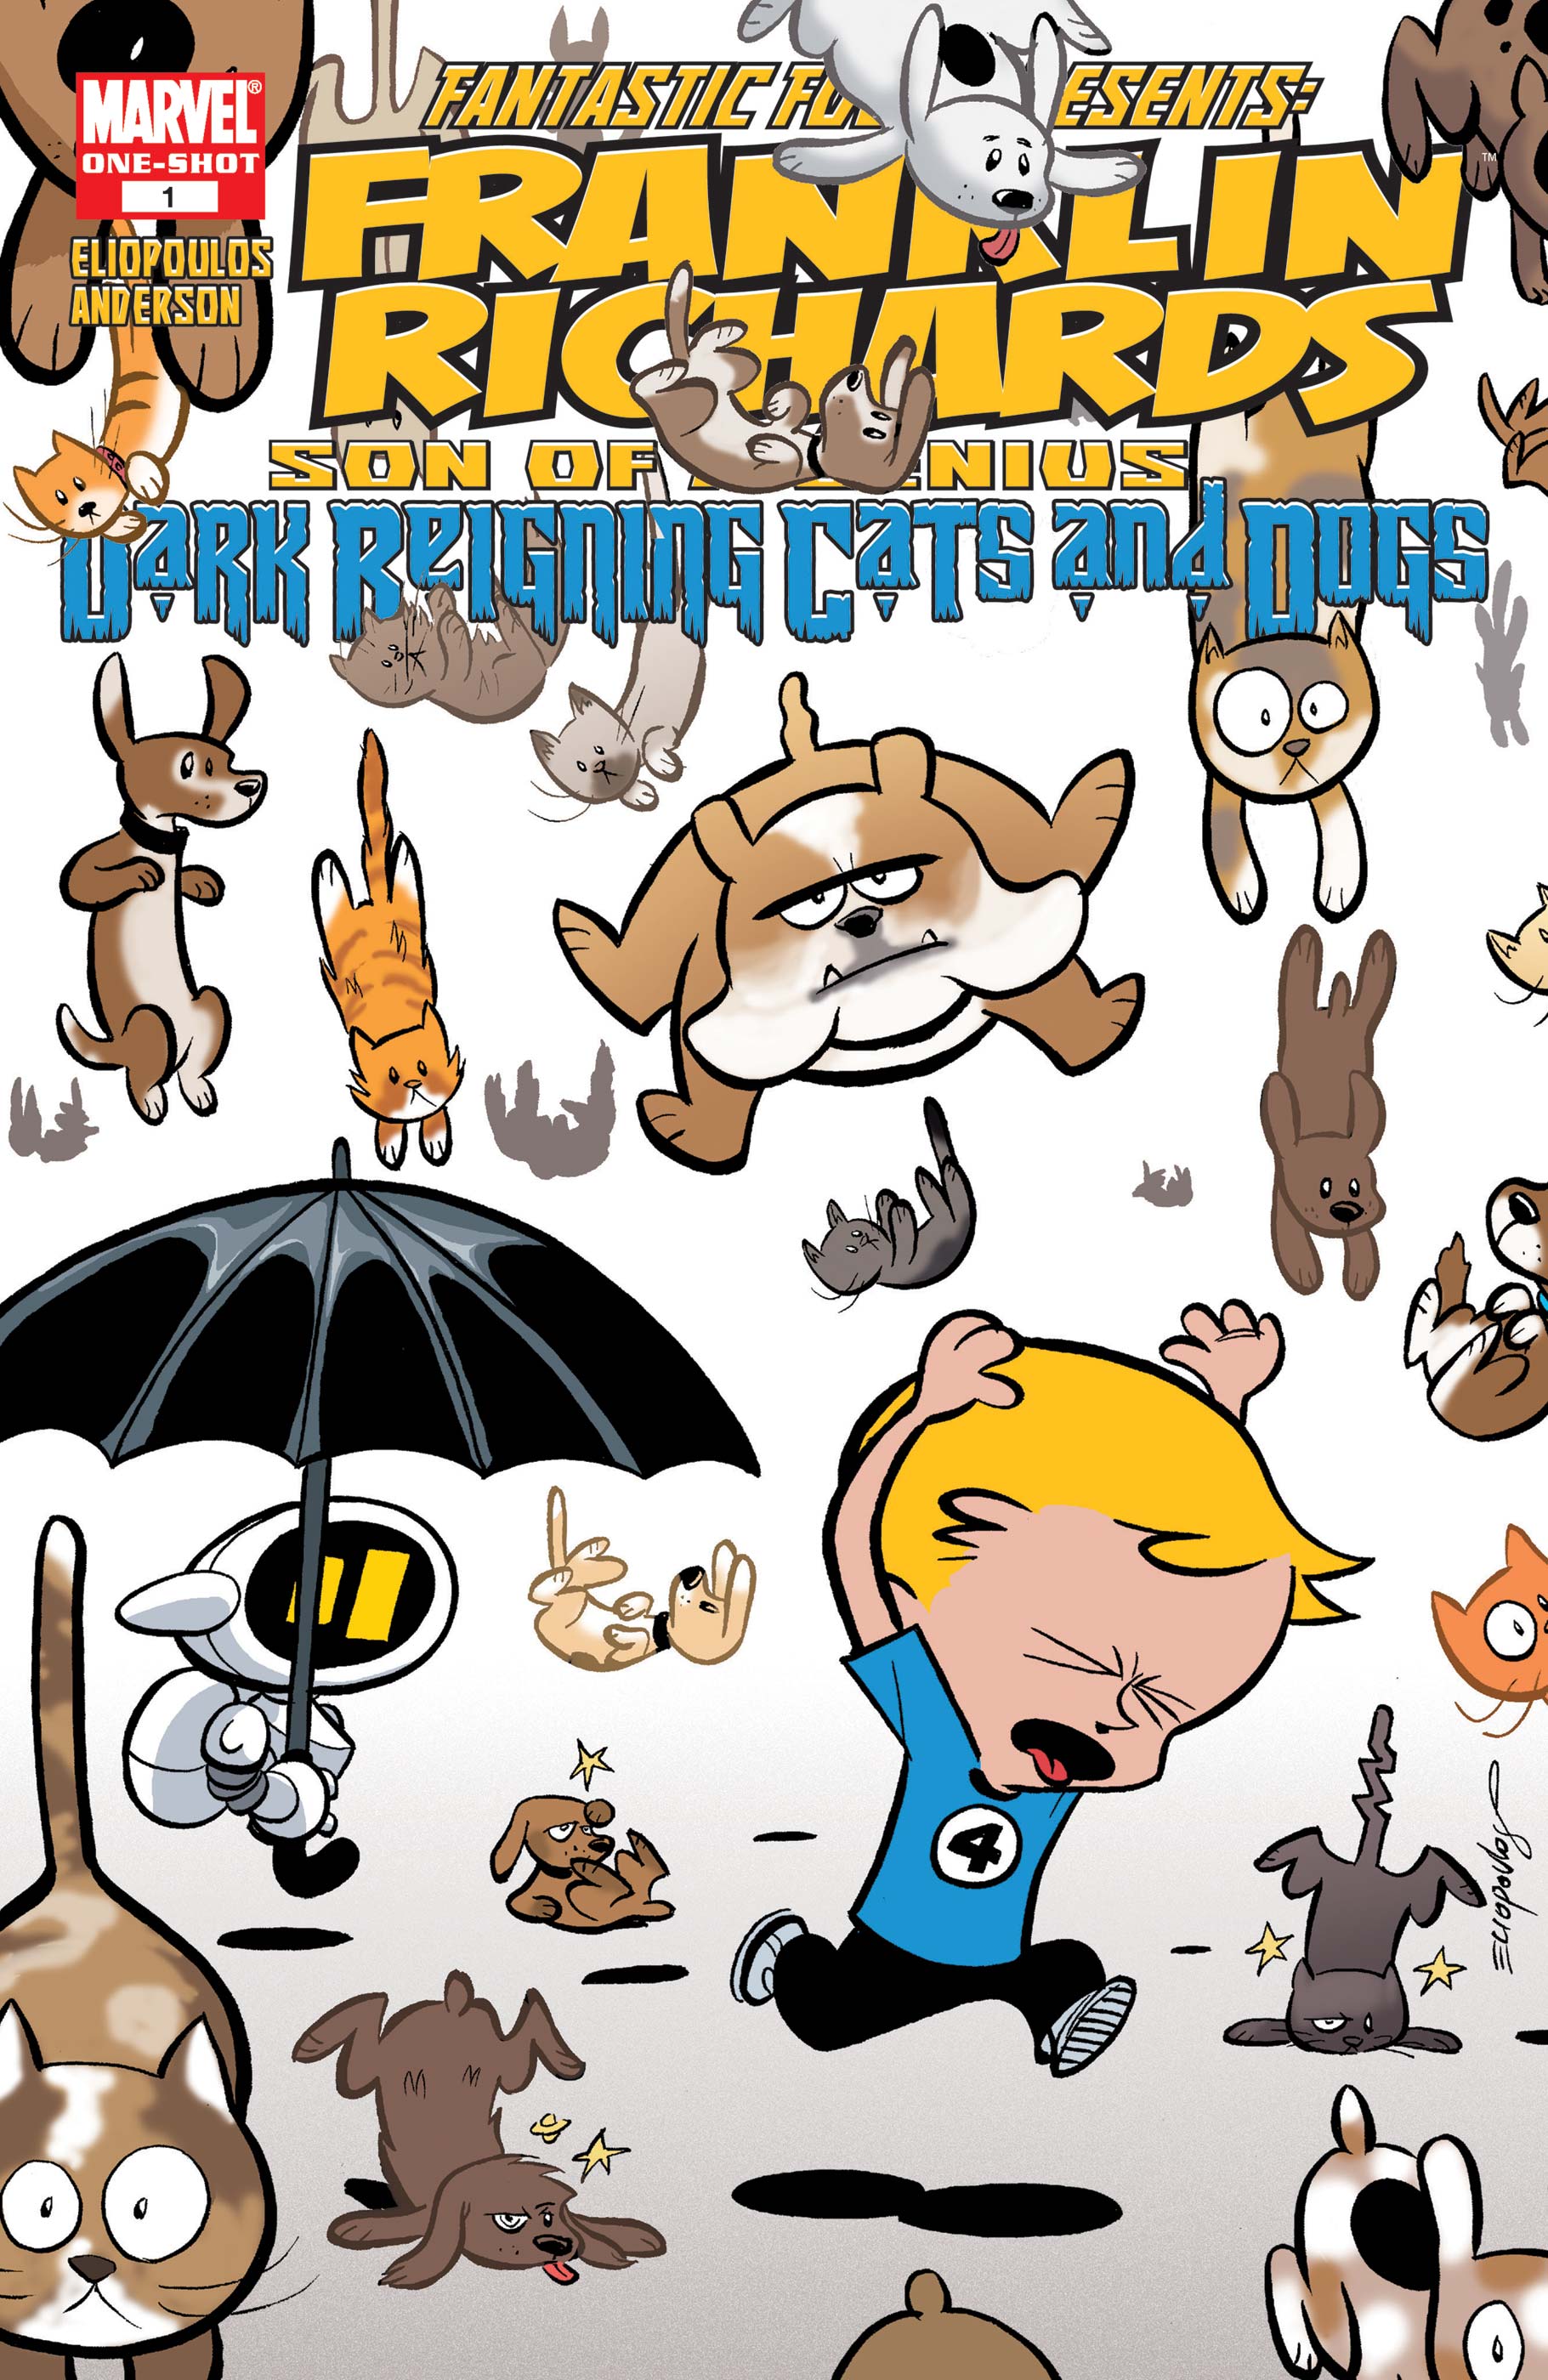 Franklin Richards: It's Dark Reigning Cats & Dogs (2009) #1